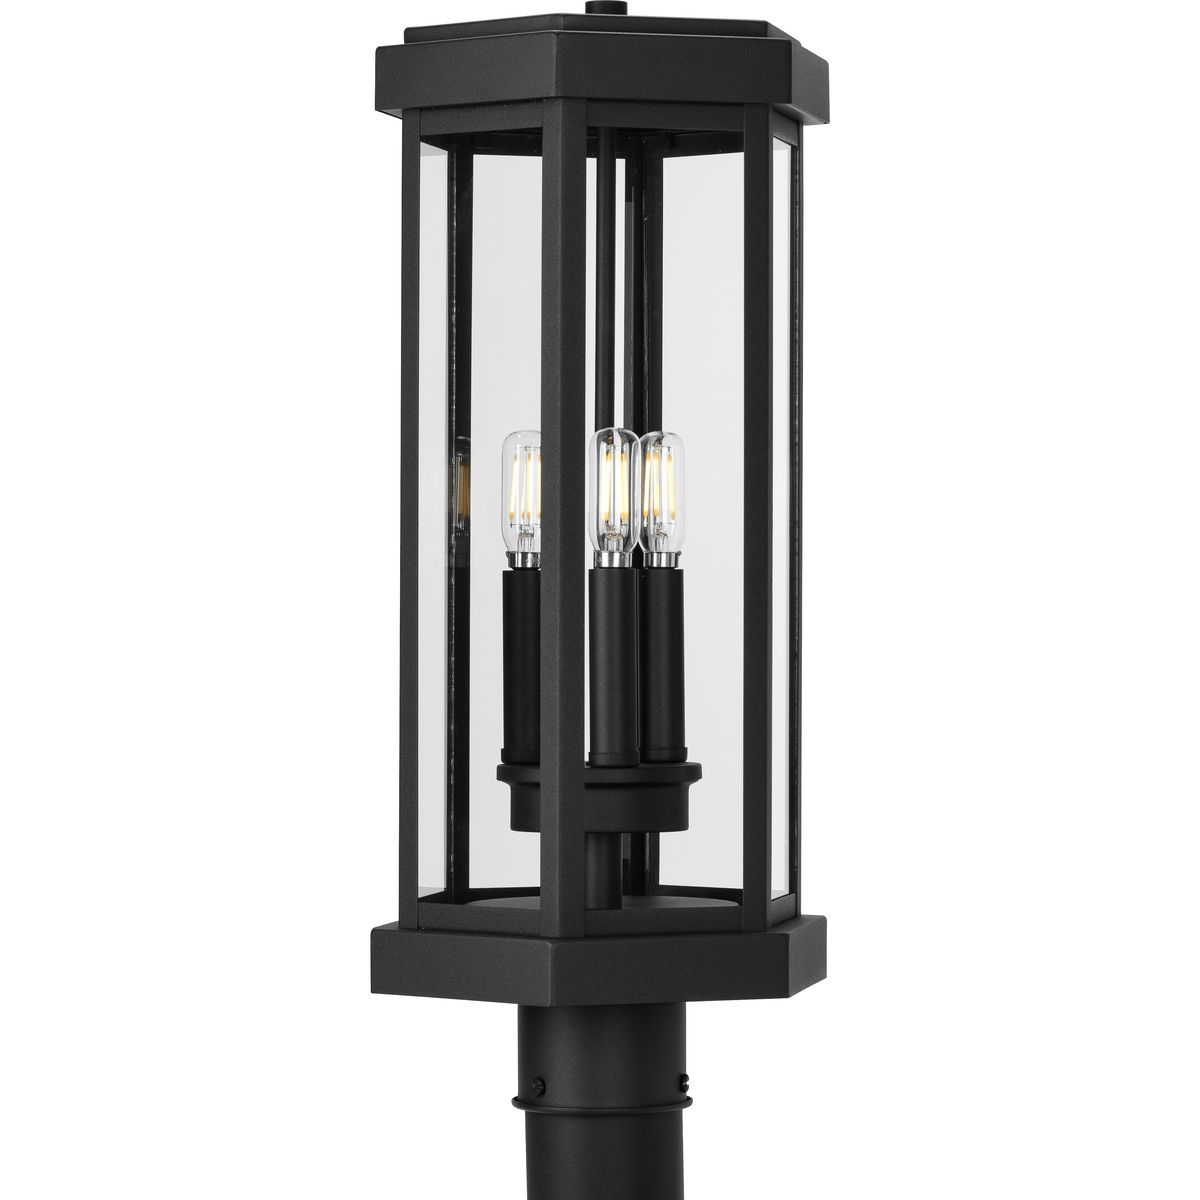 Ramsey Collection Textured Black Modern Farmhouse Post Outdoor Light - Wet Location Listed